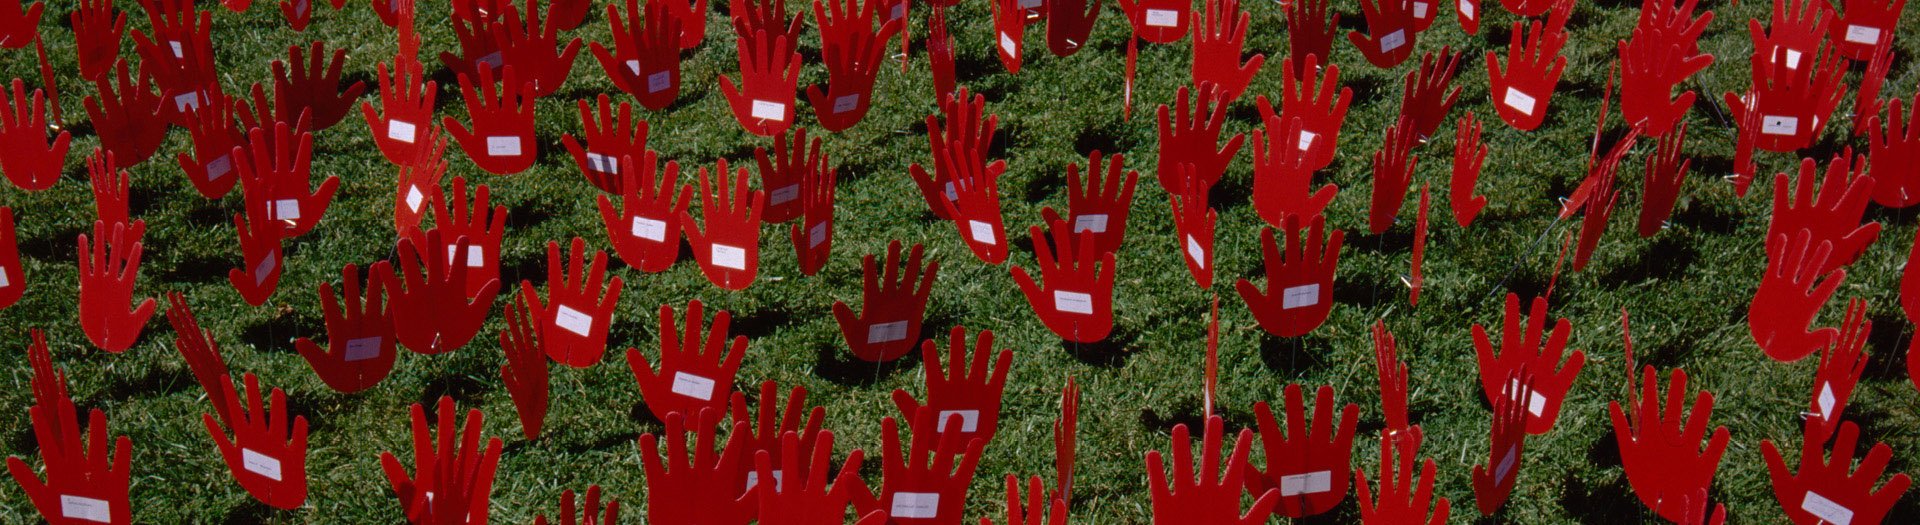 A photo full of red plastic hads with white name tags stuck on the palms, attached to a long wire planted in green ground cover foliage.